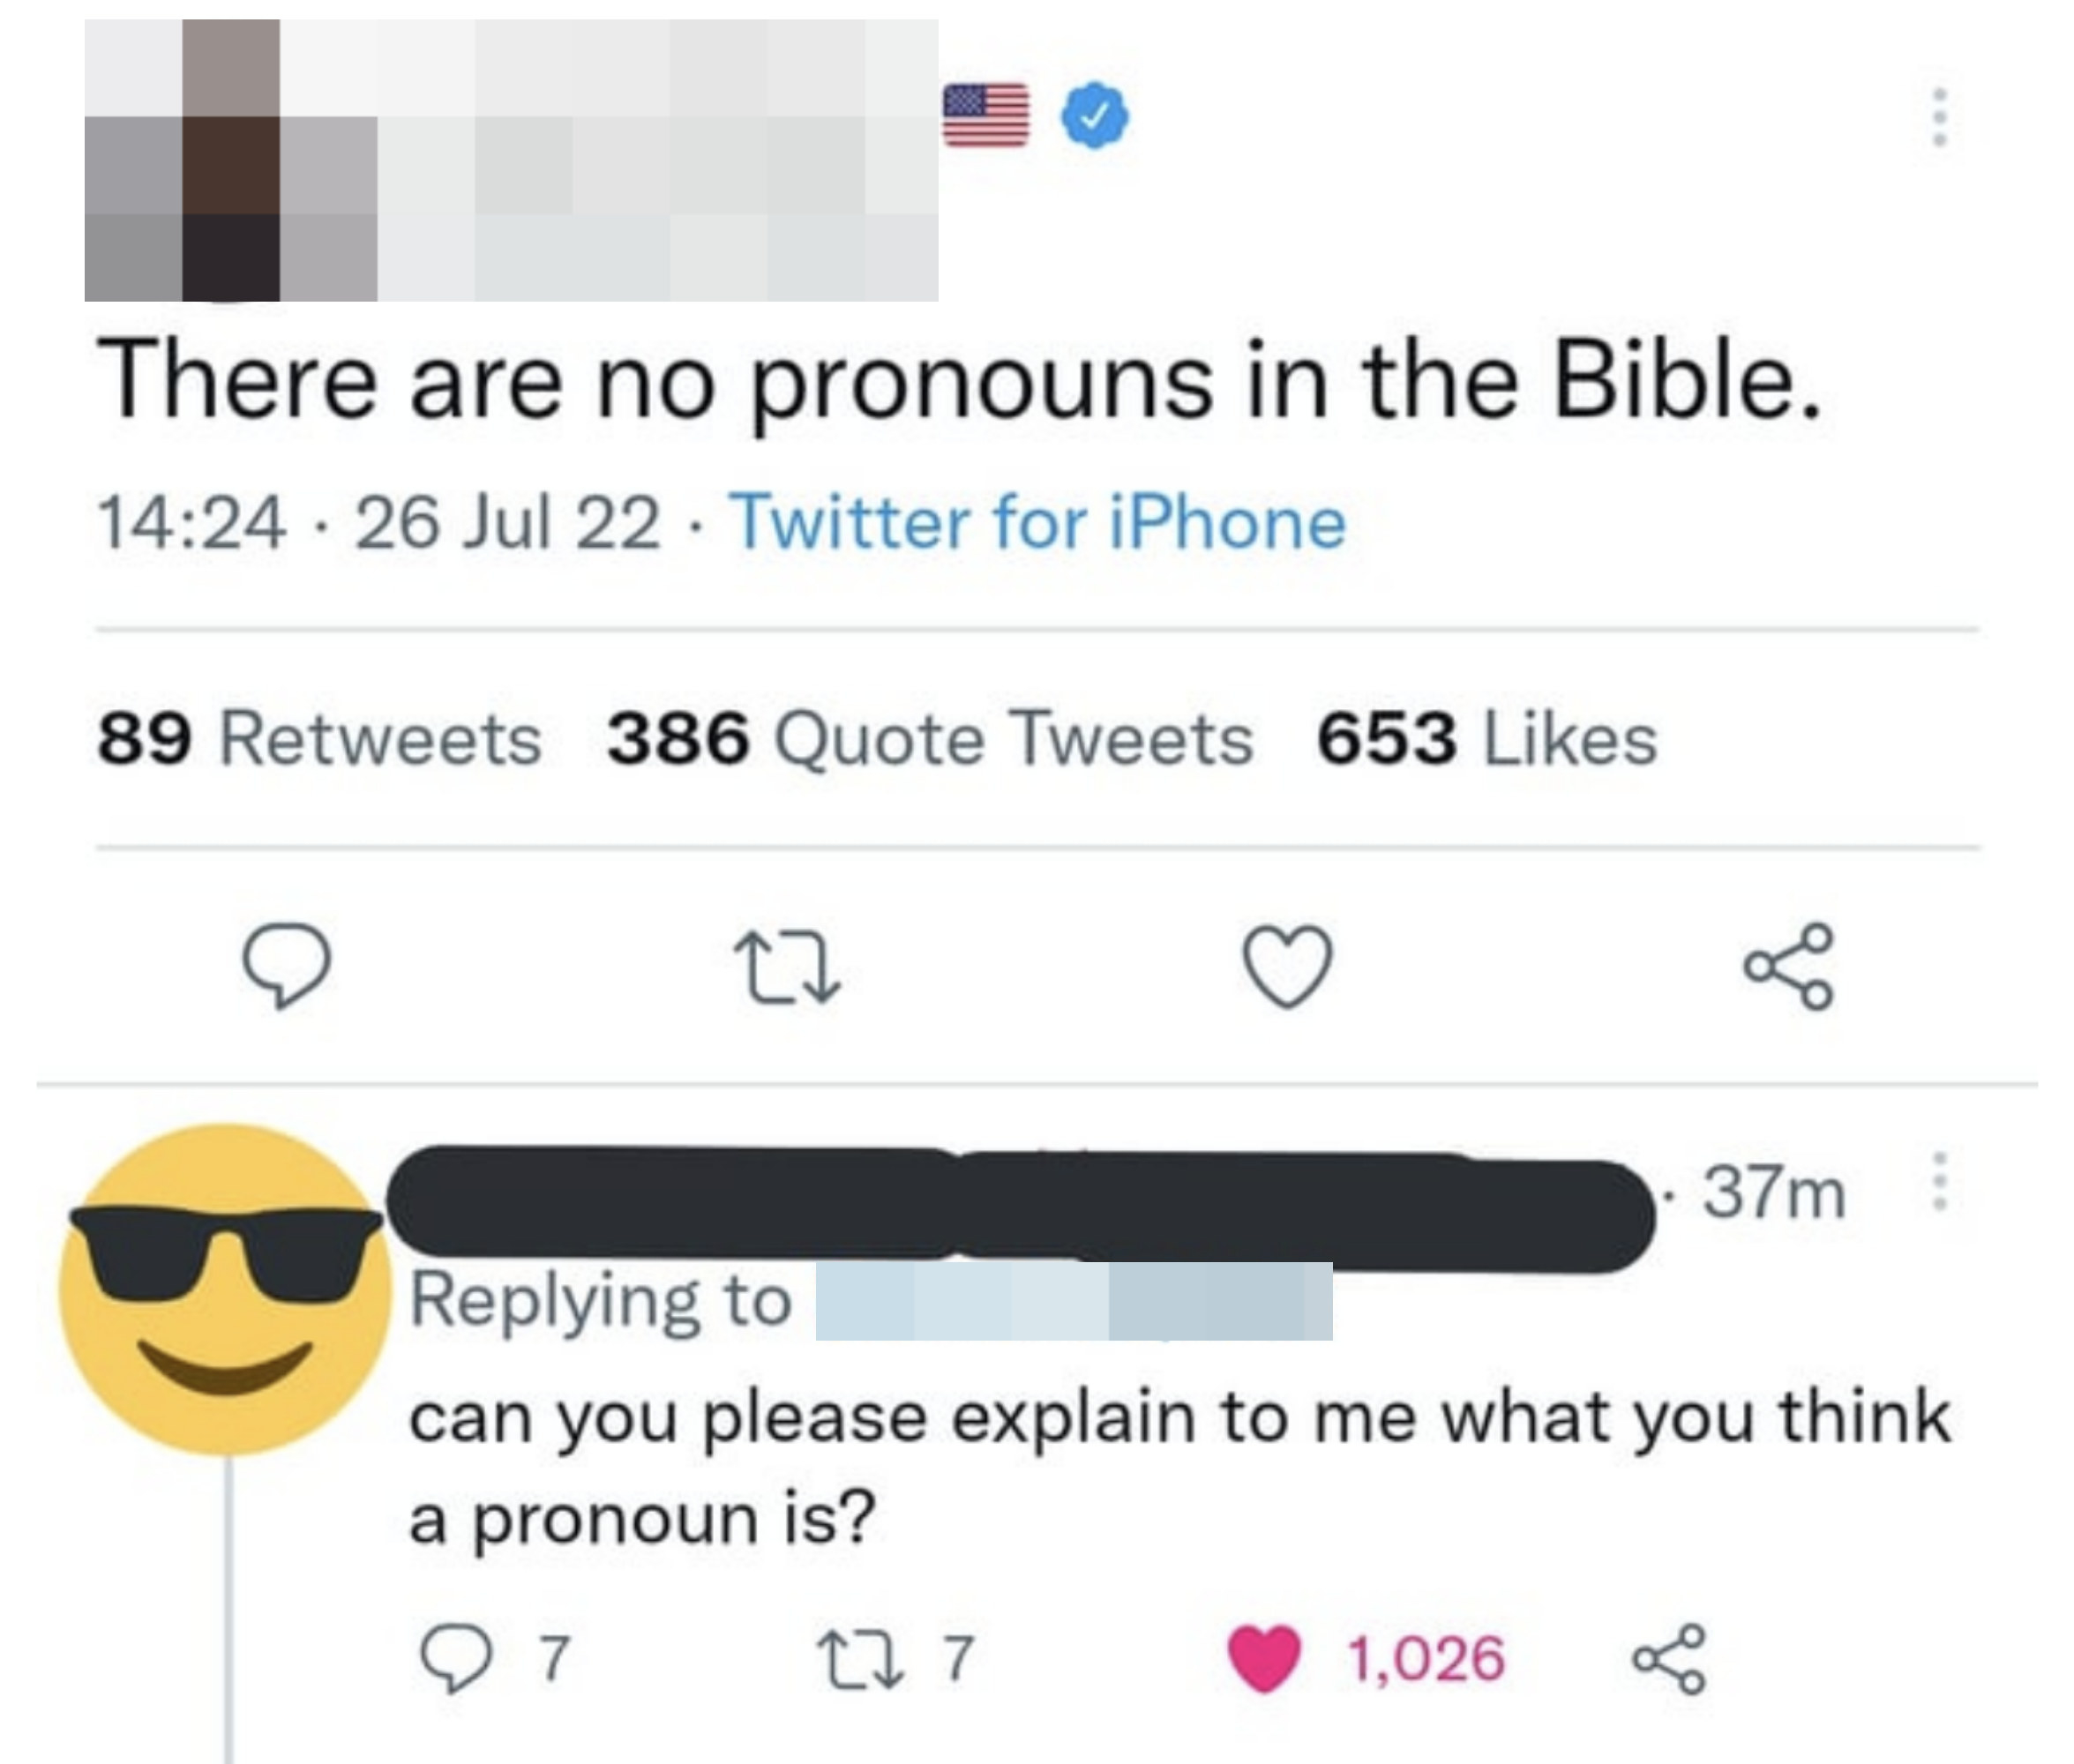 &quot;There are no pronouns in the Bible.&quot;